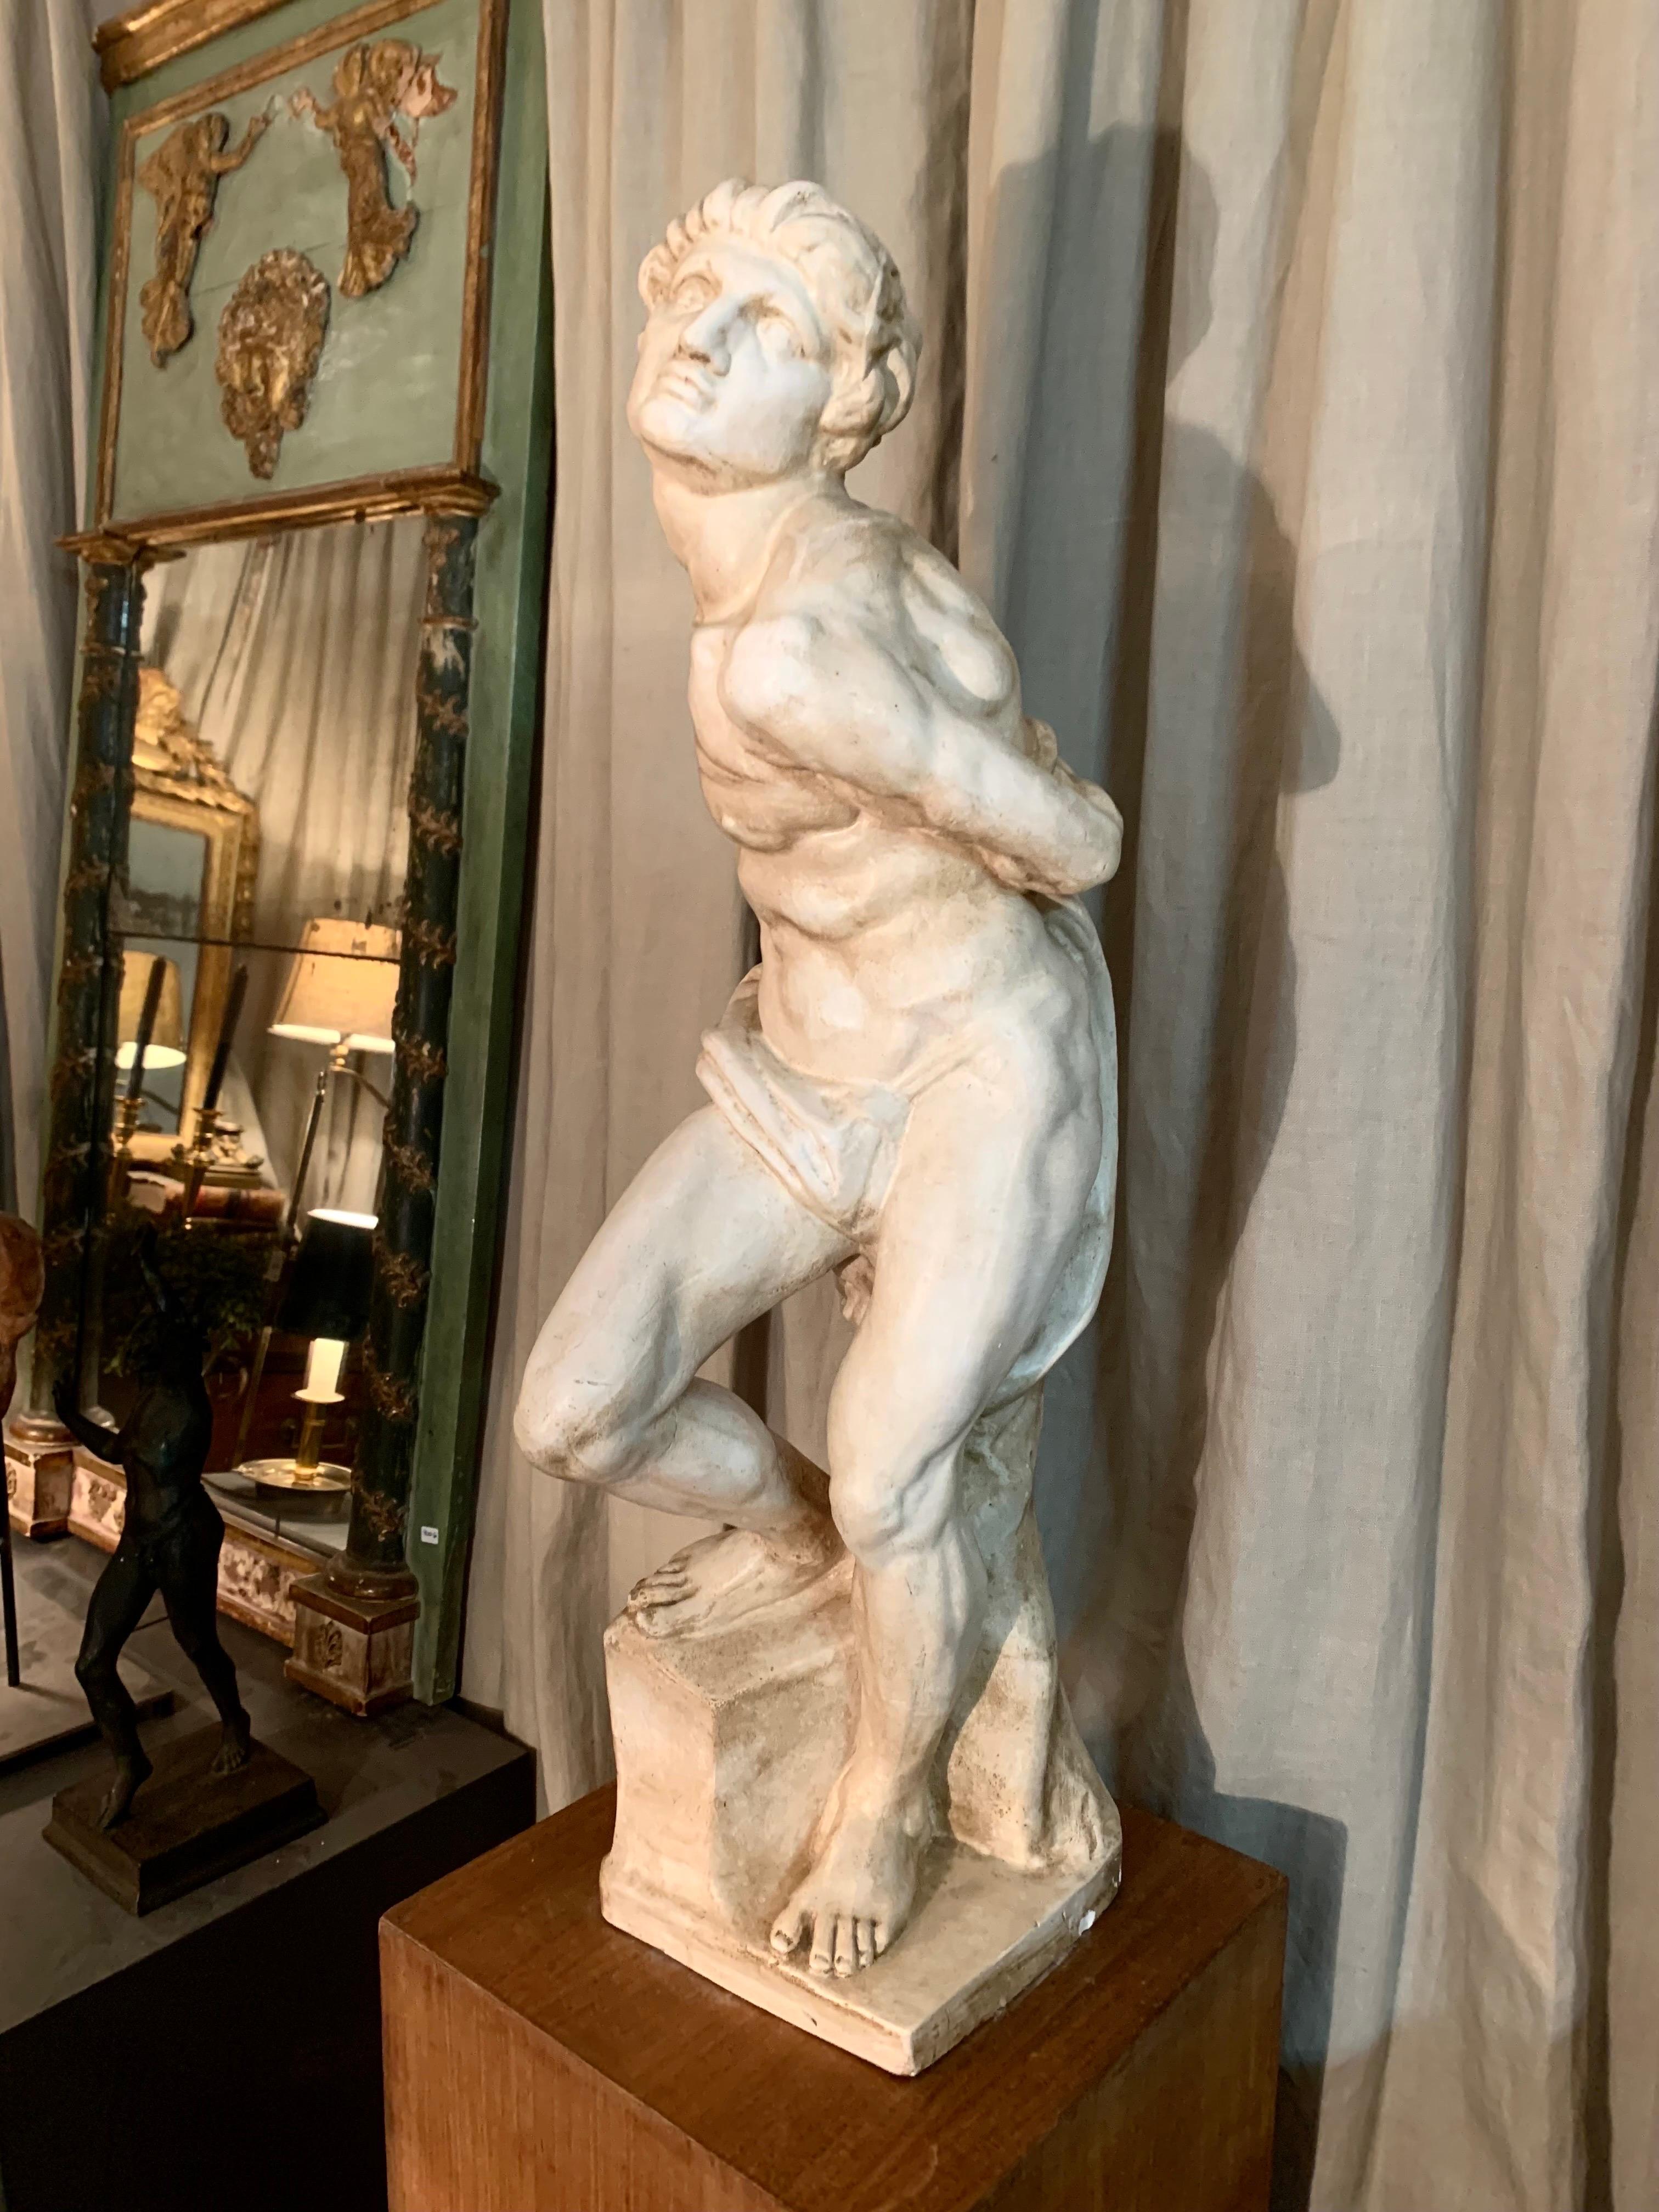 A plaster sculpture representing Michelangelo's famous Slave.
This sculpture was molded at the Royal School of Fine Arts of San Fernando. Madrid Spain.
It is a work of great quality, it has a slight patina, and its state of conservation is good, it